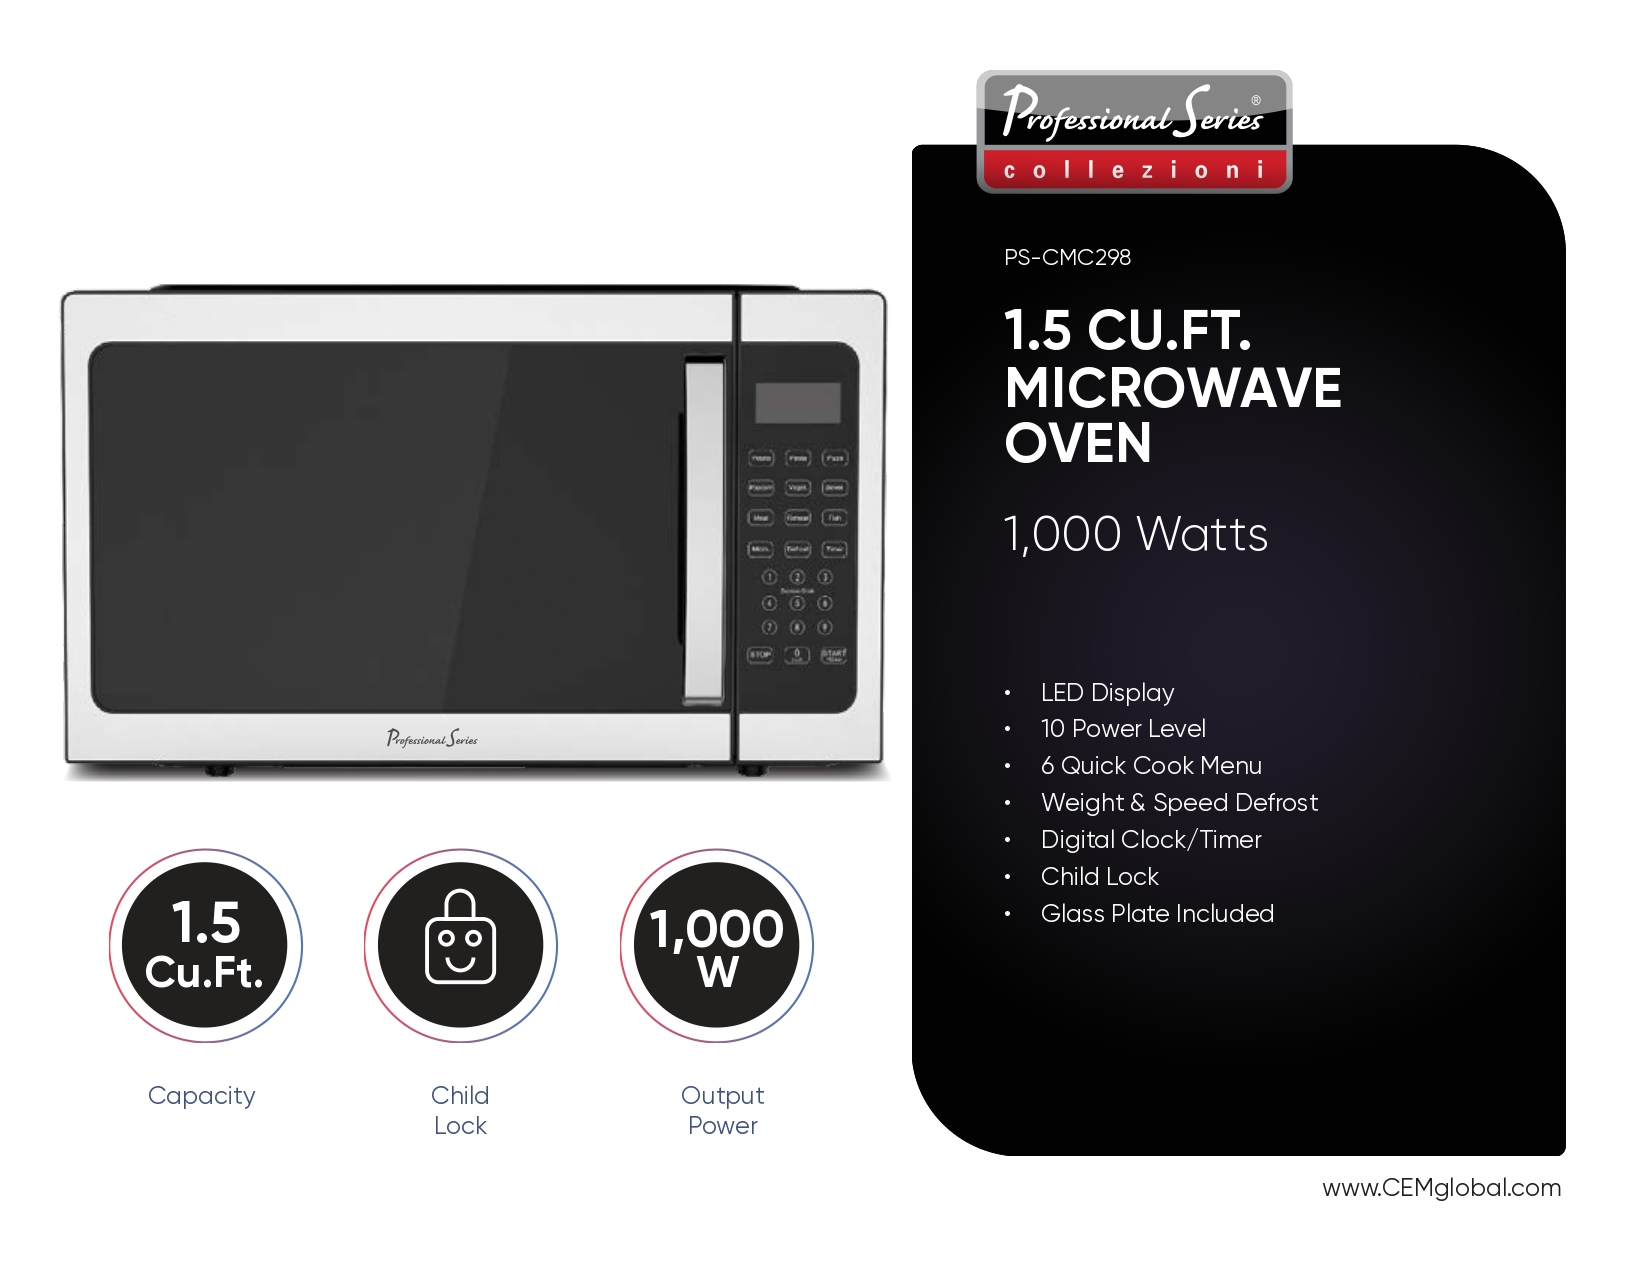 1.5 CU.FT. MICROWAVE OVEN